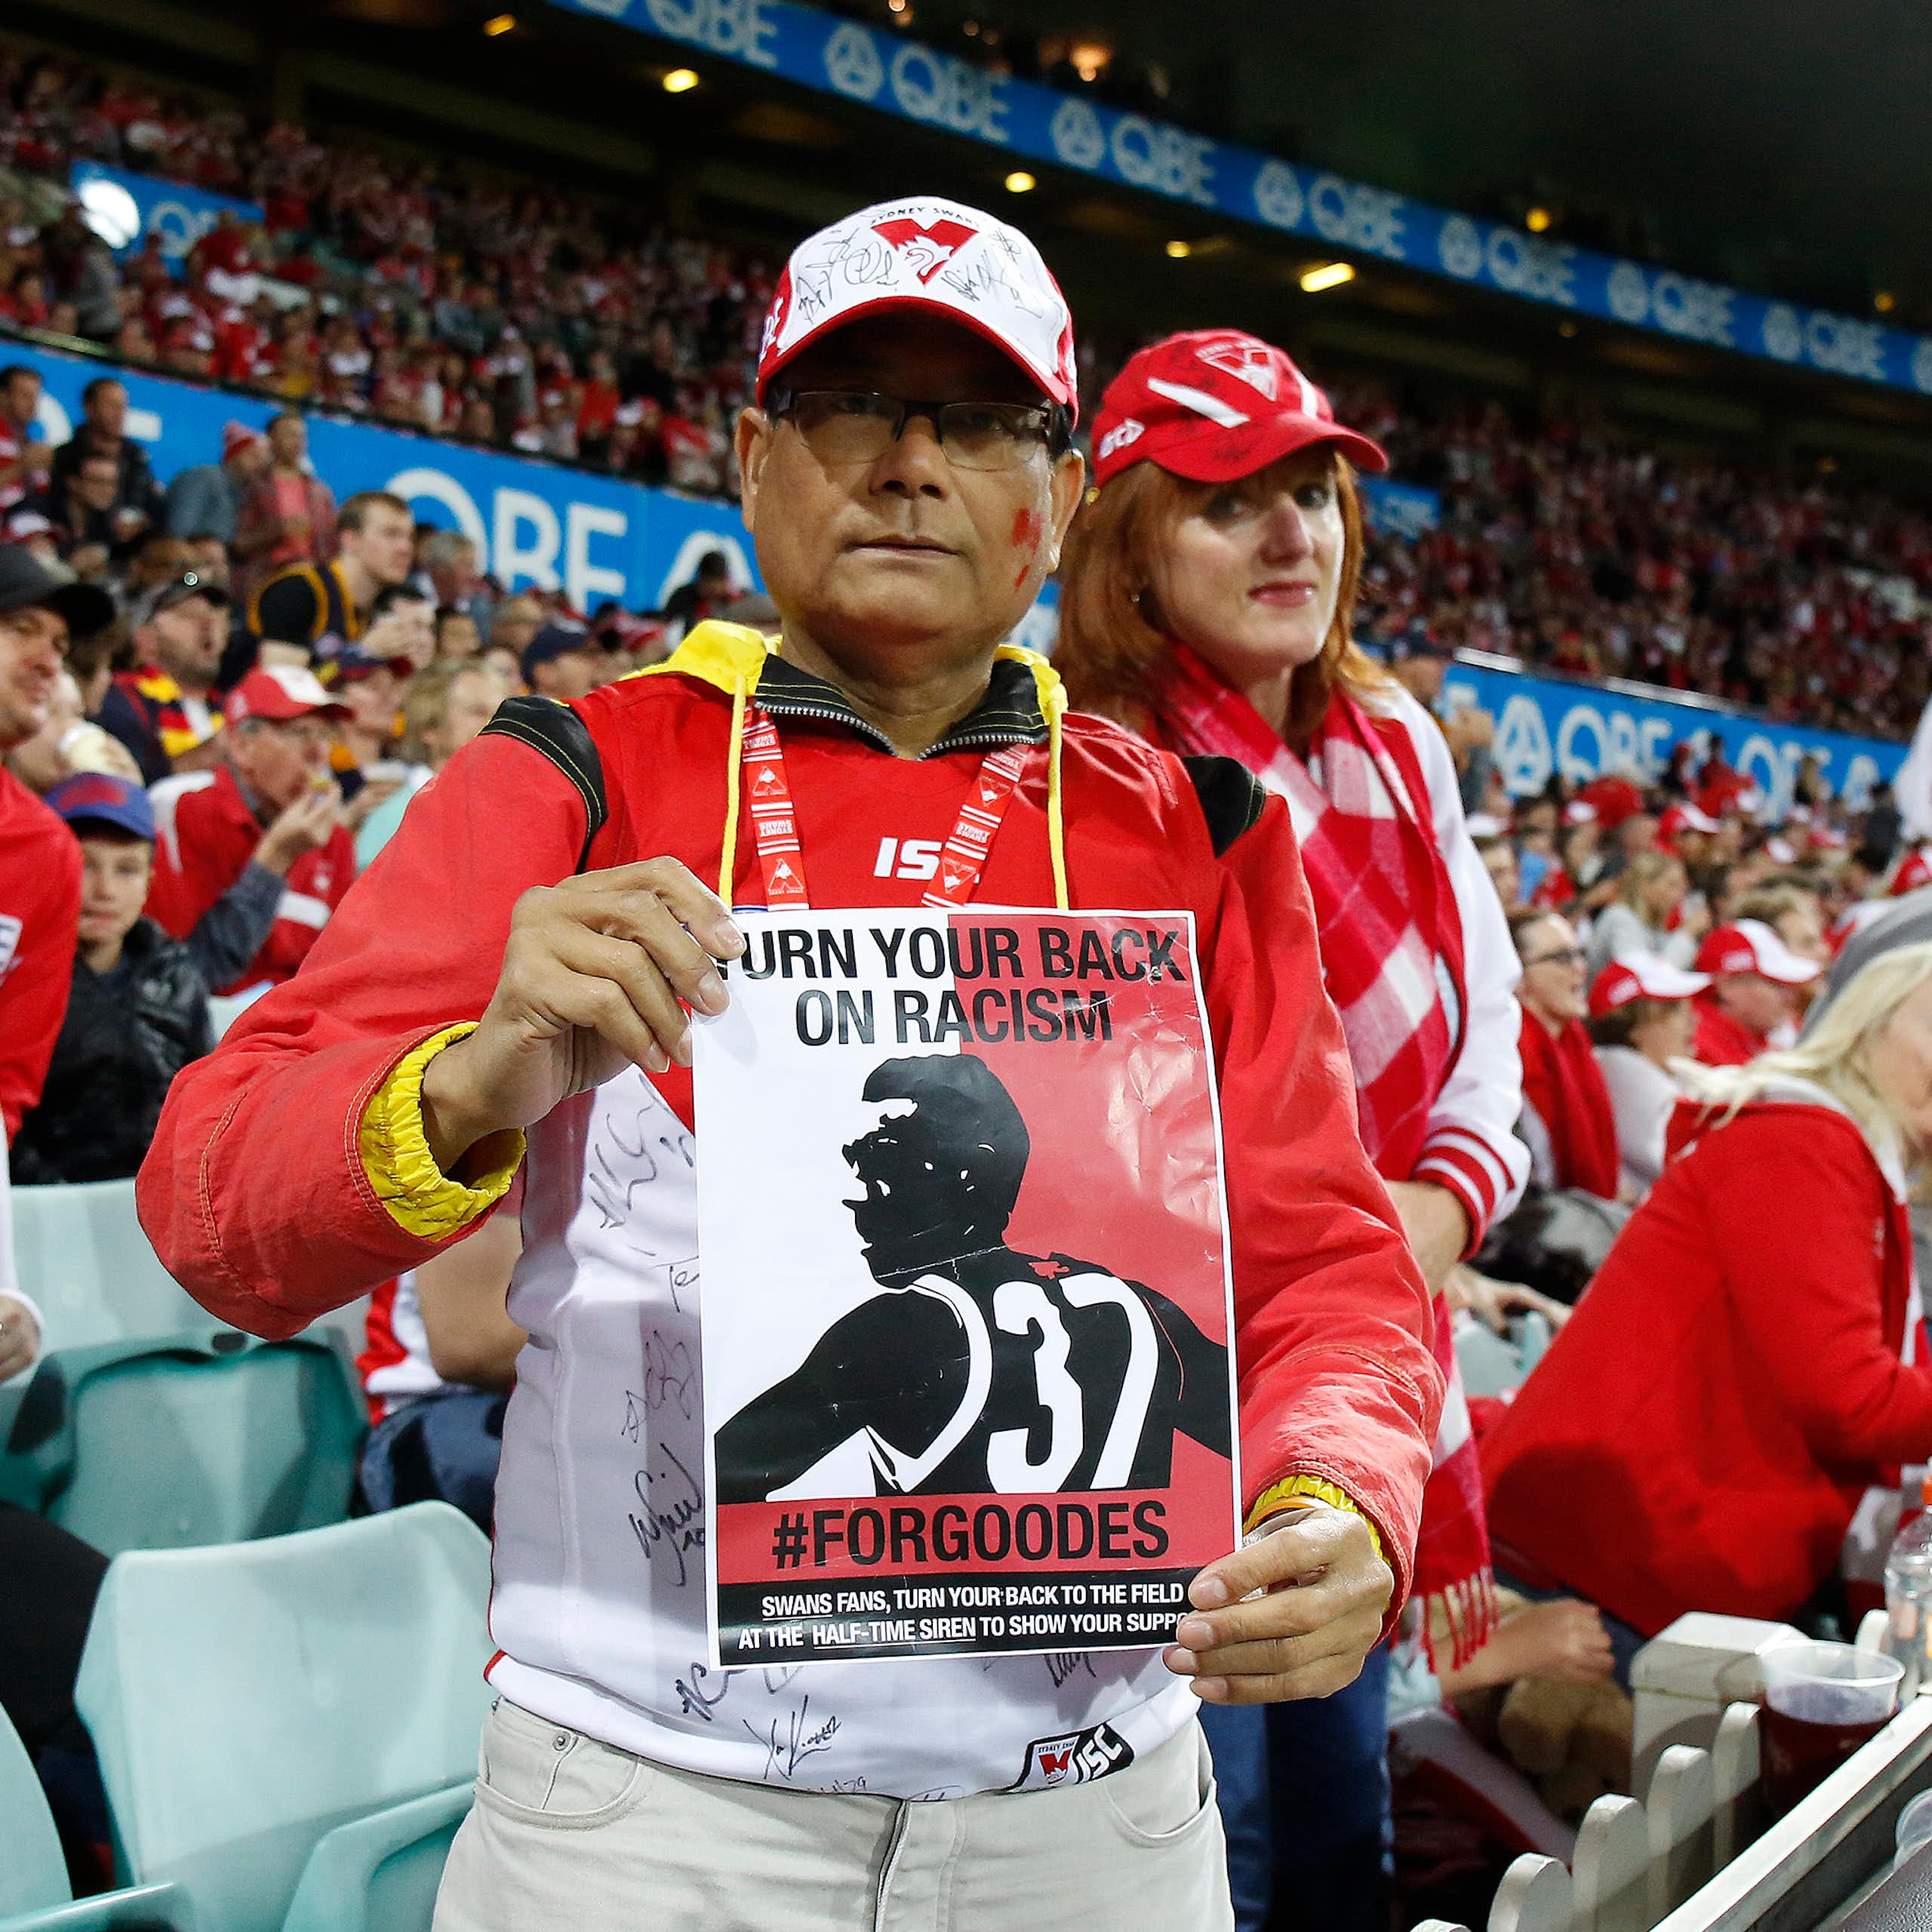 A Sydney Swans fan holds a leaflet in support of Adam Goodes in 2015